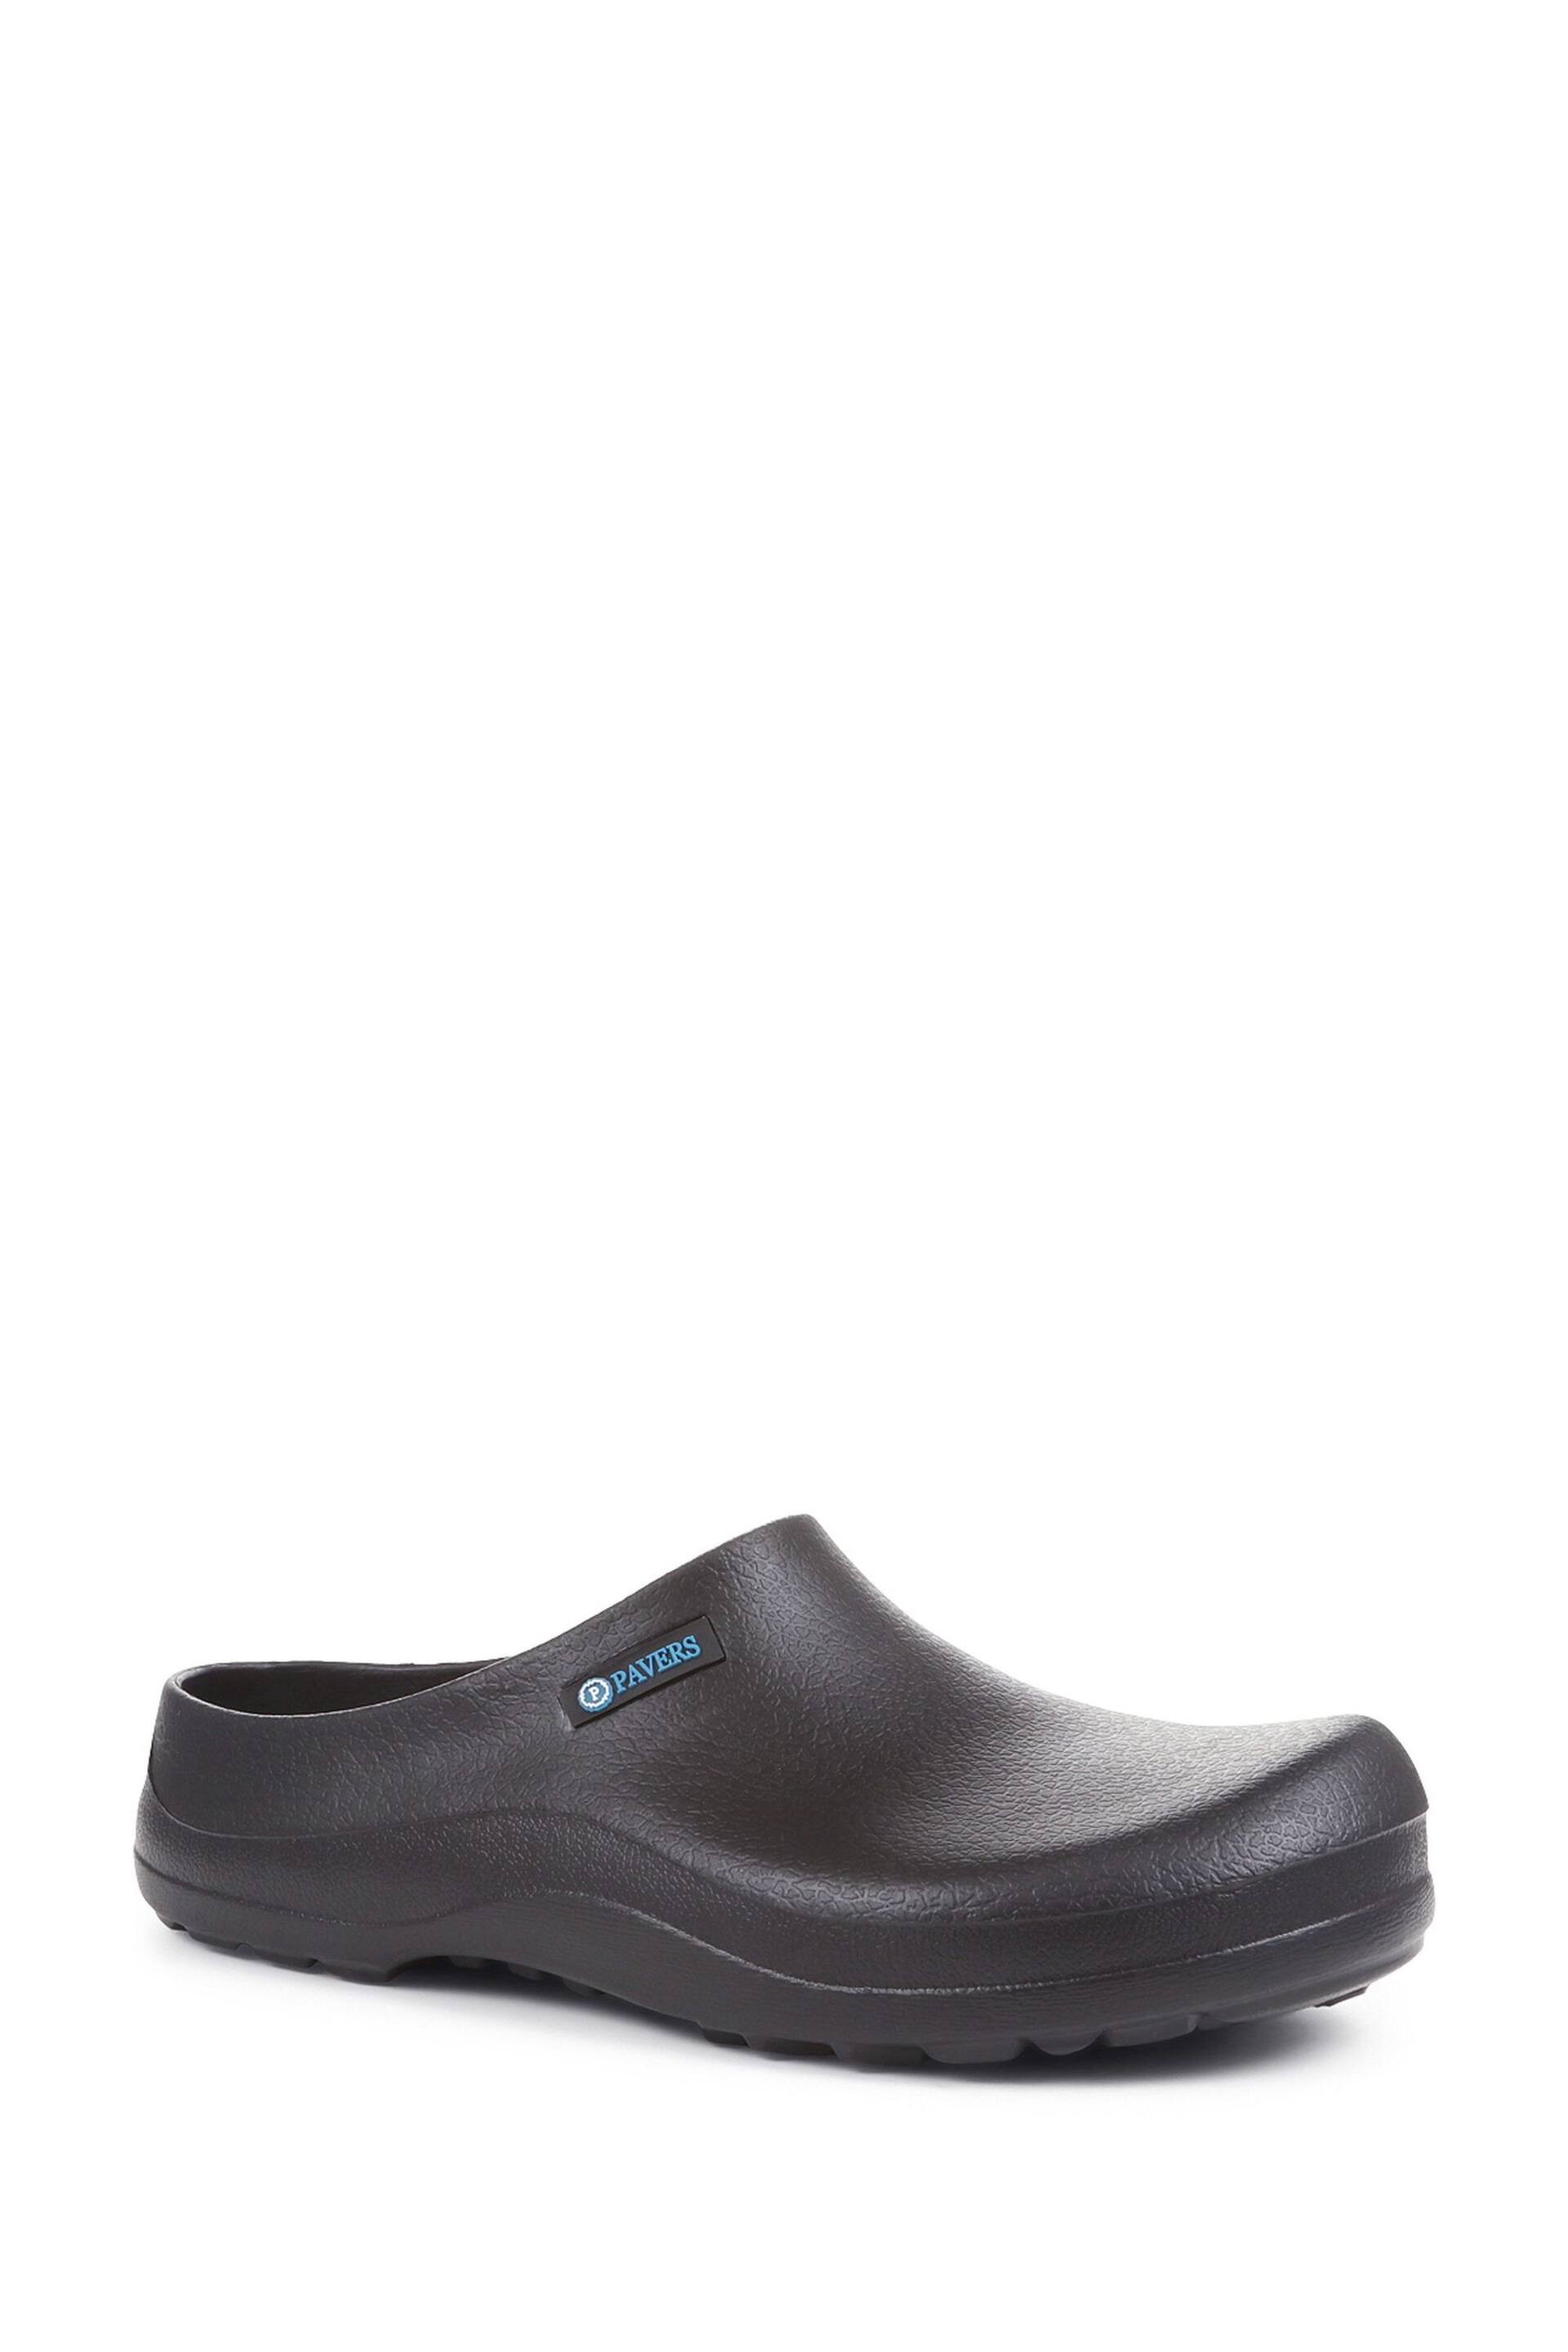 Pavers Black Welly Clogs - Image 2 of 5